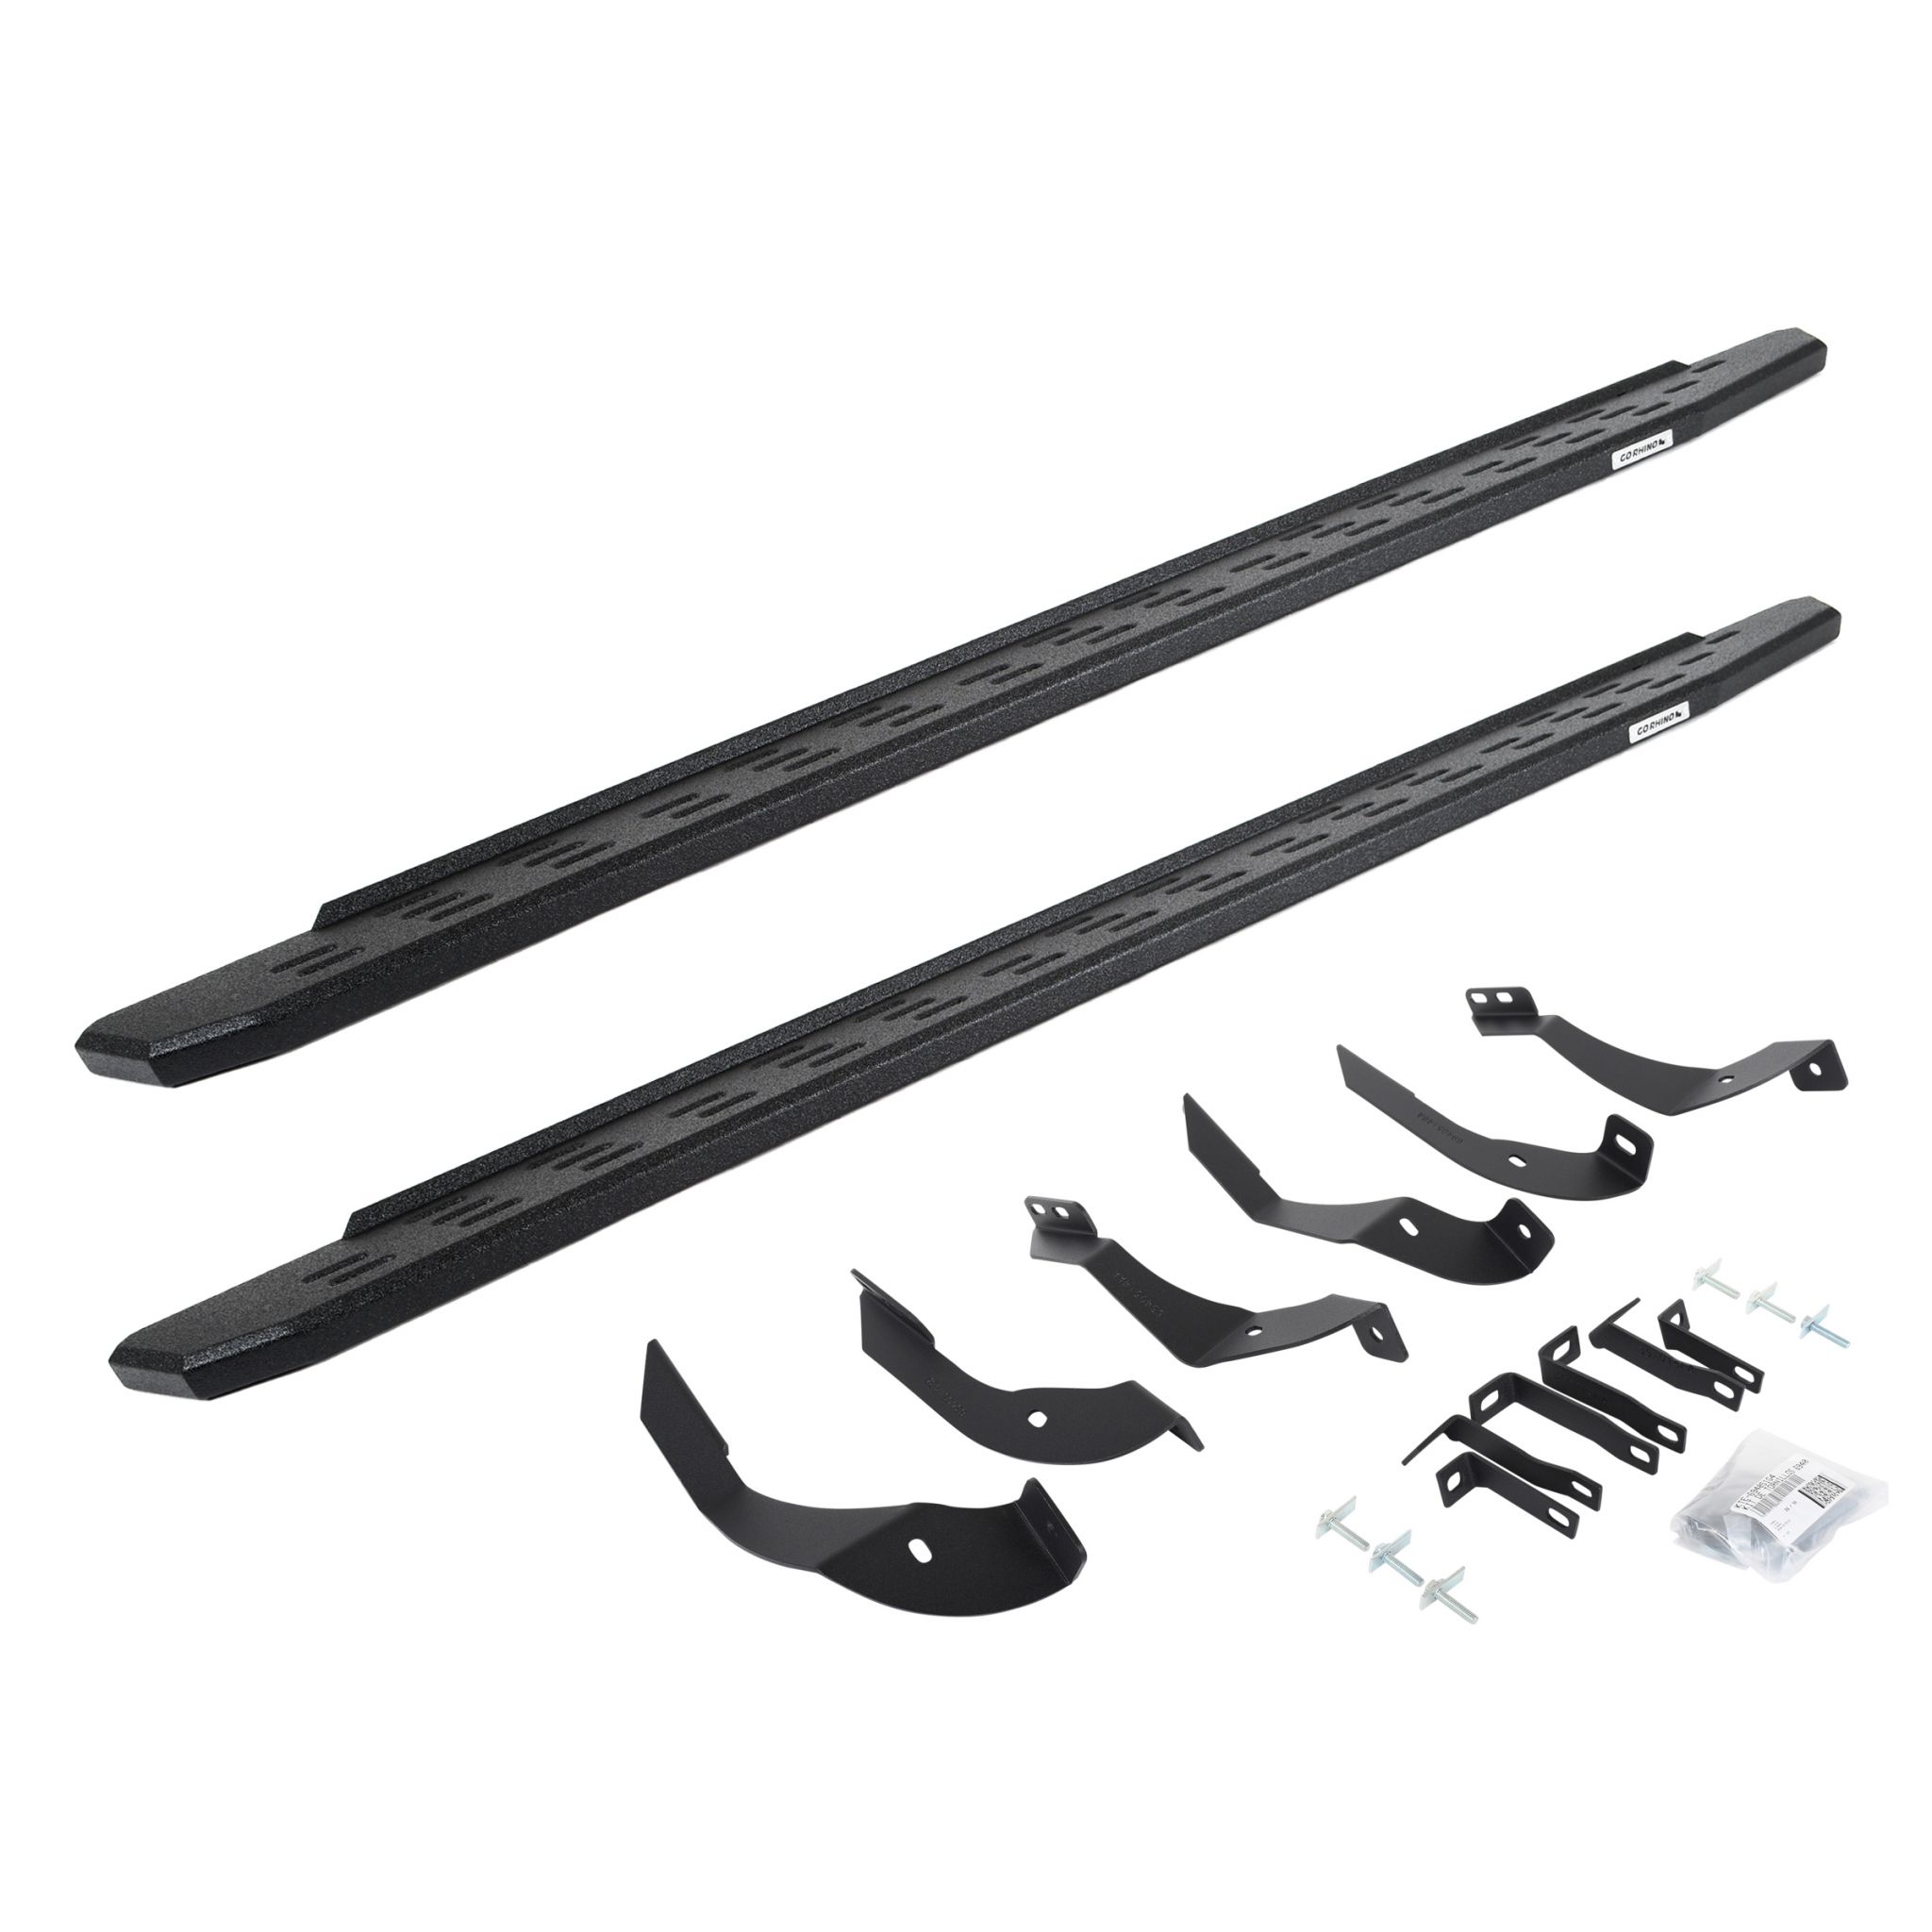 Go Rhino 69605187T - RB30 Running Boards with Mounting Bracket Kit - Protective Bedliner Coating